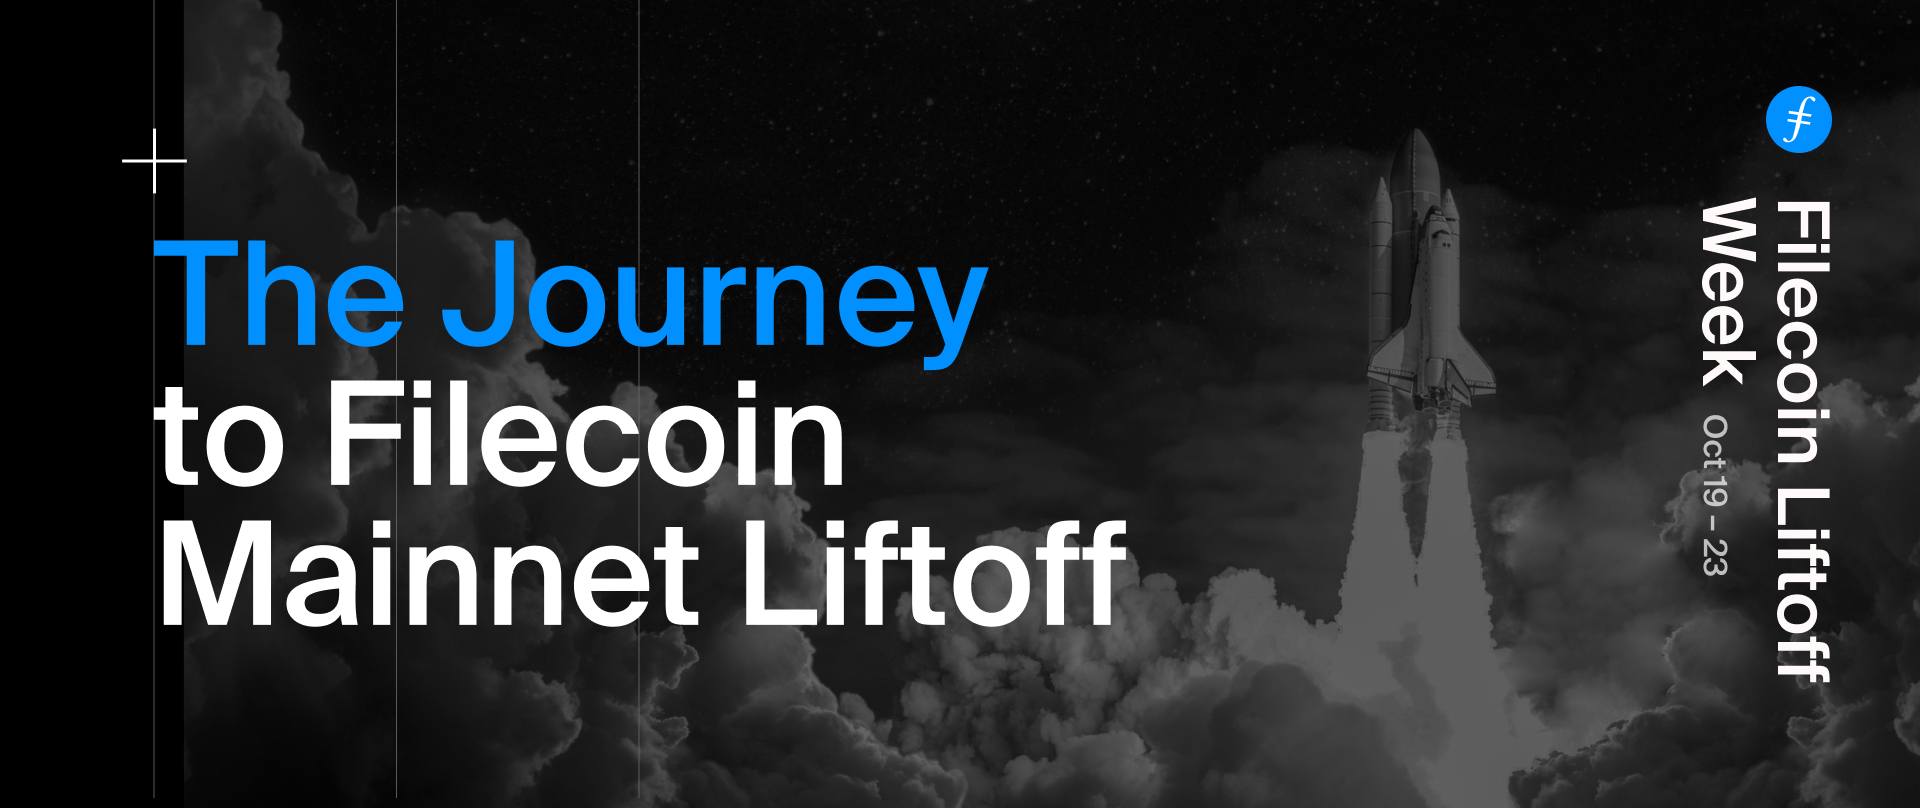 The Journey to Filecoin Mainnet Liftoff